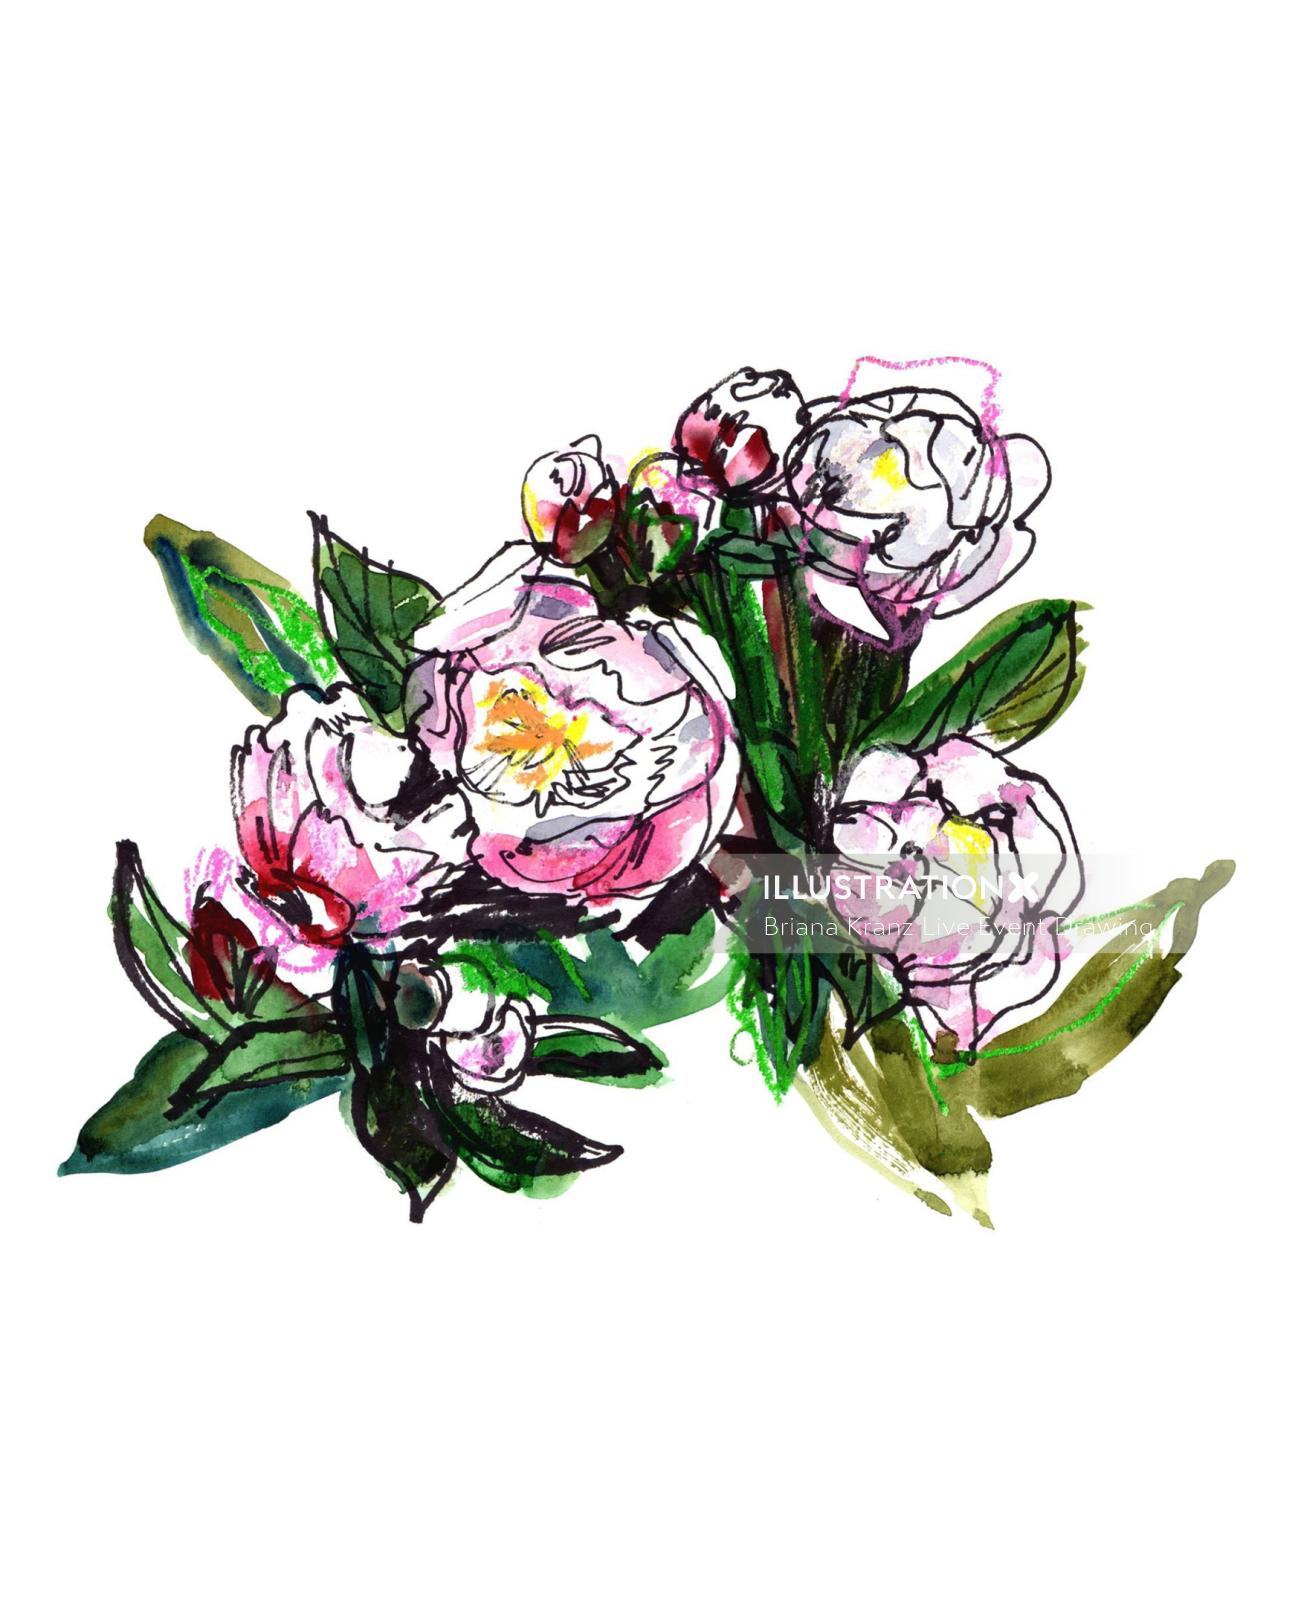 Watercolour painting of peonies